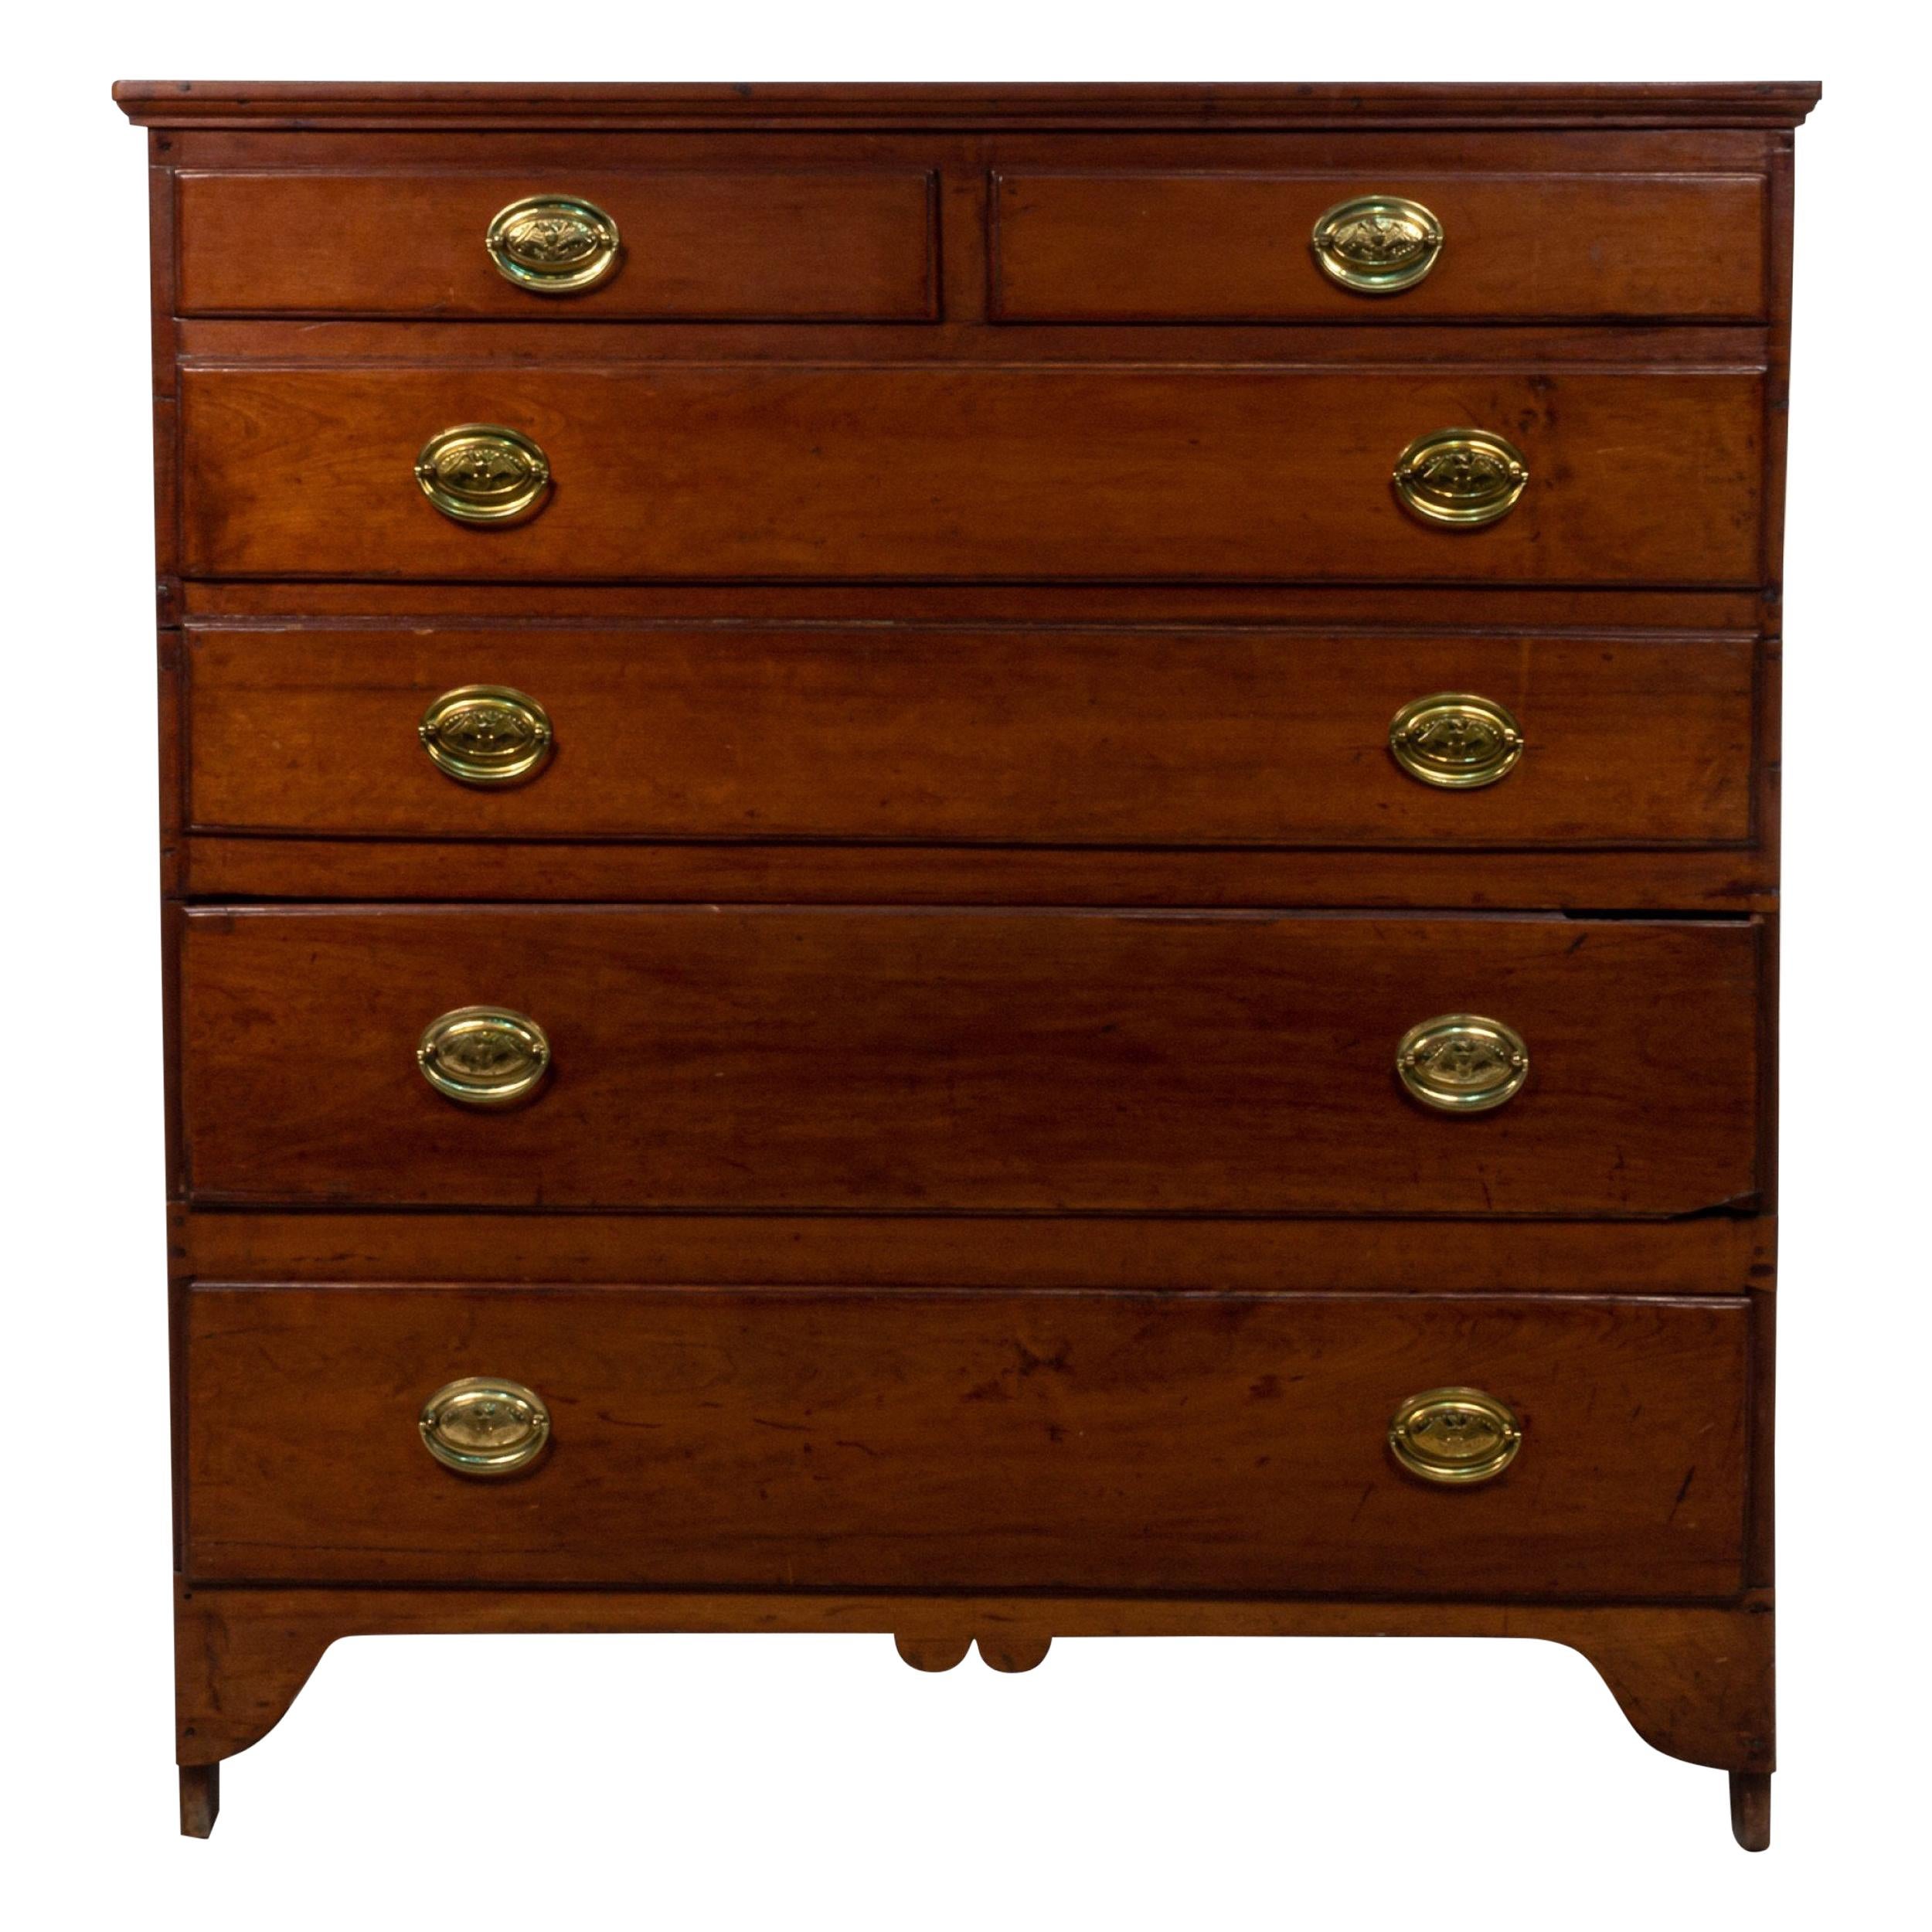 Federal Style Mahogany Chest of Drawers with Lift Top